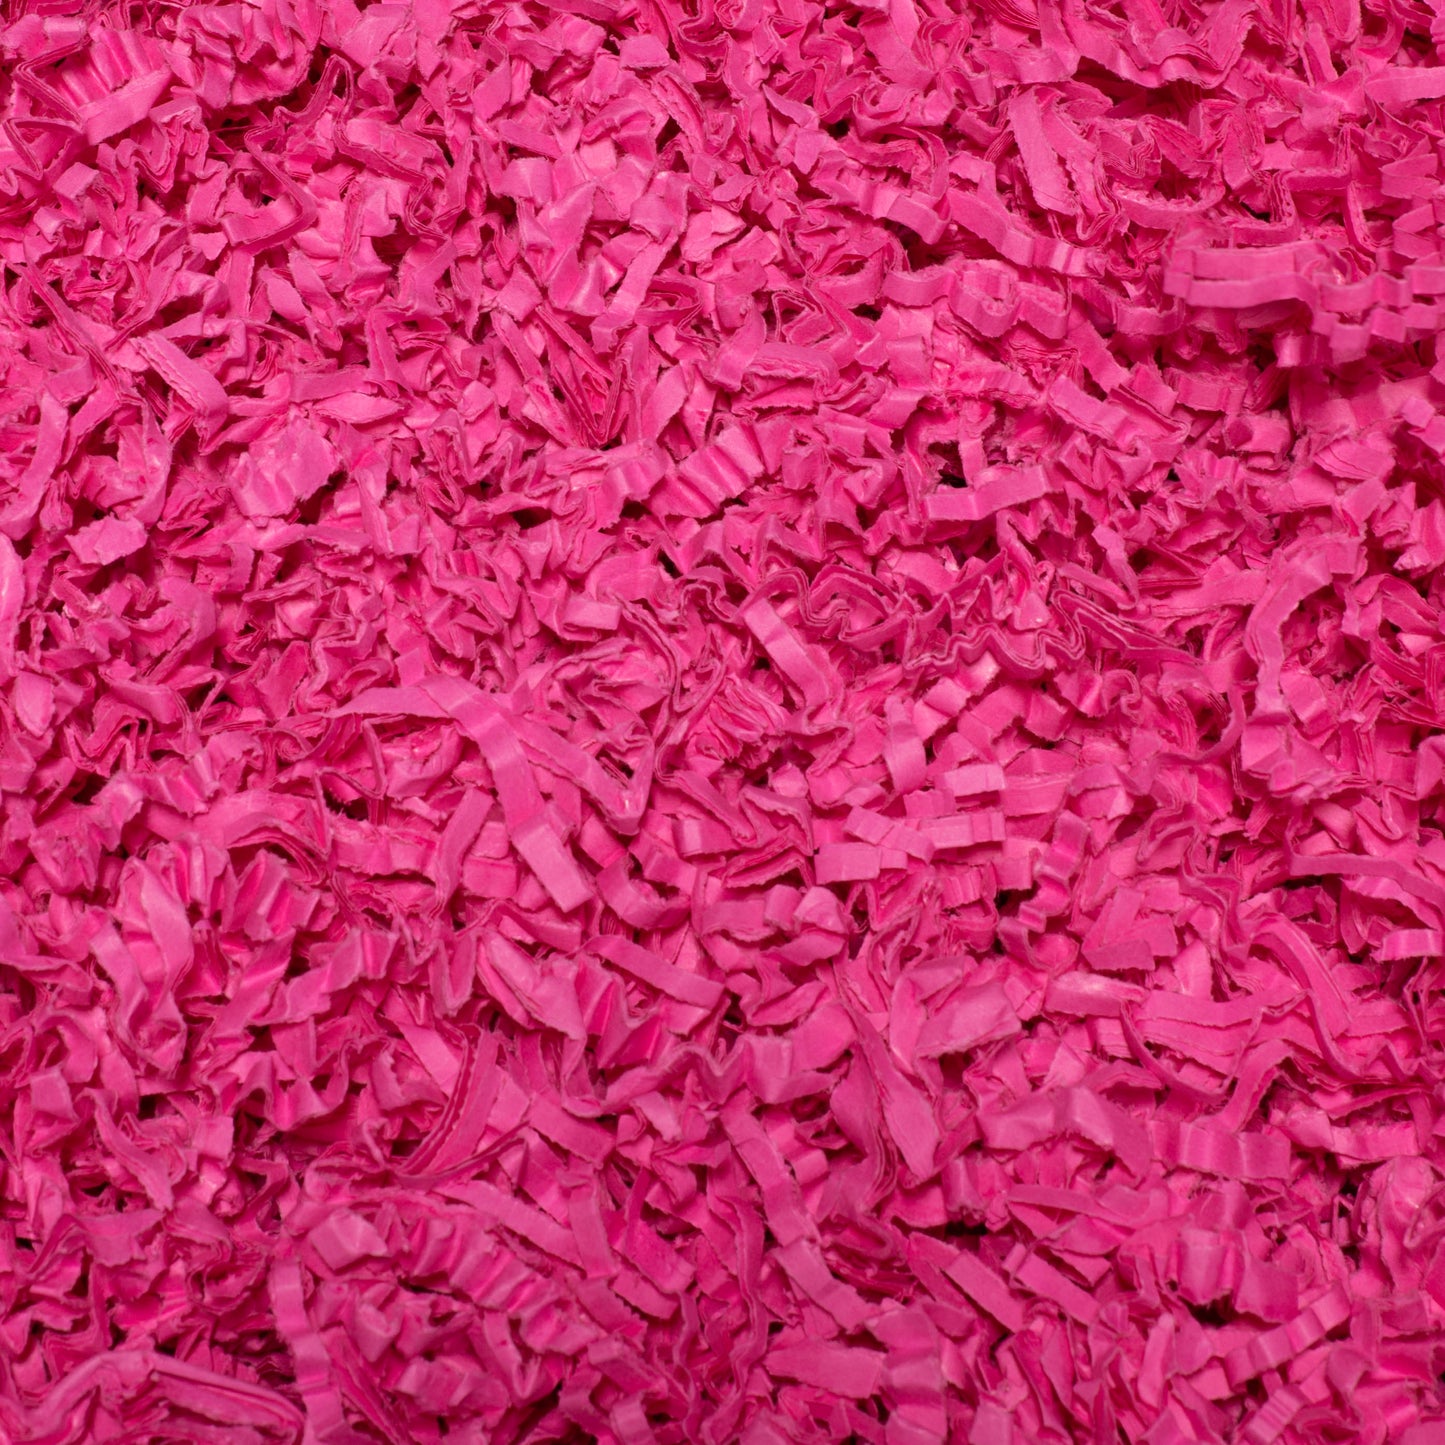 Sizzle Basket Filler - Fuchsia - 10 lb Box - Made in Canada - Sizzle-Fill - Krinkle Cut - Crinkle Shred